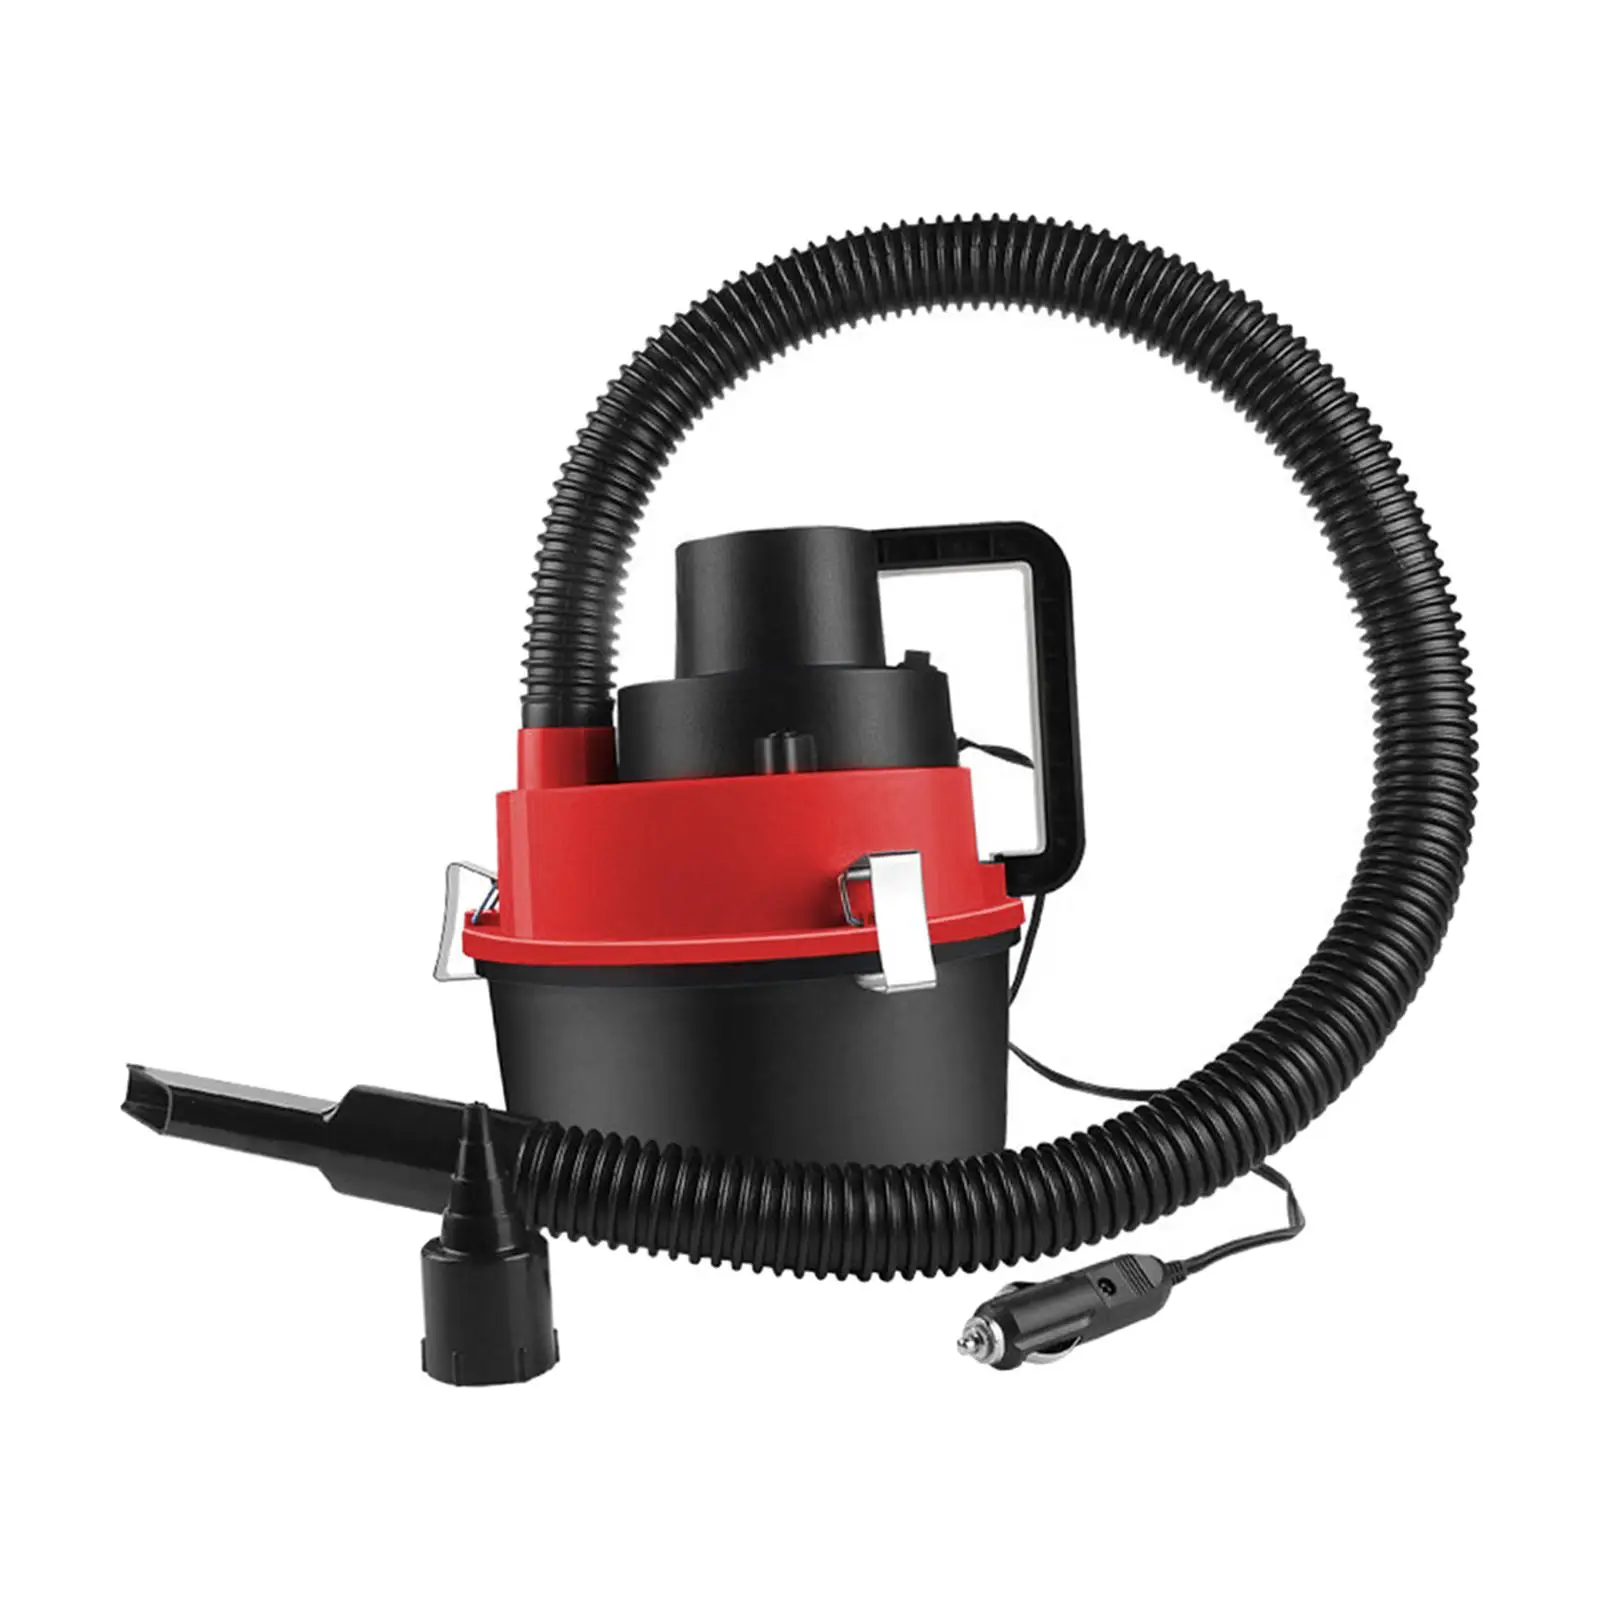 12V Wet/Dry Car Canister Vacuum Flexible 3 Foot Hose for Greater Reach Wet or Dry Pickup 4L Capacity Durable Light Duty Compact